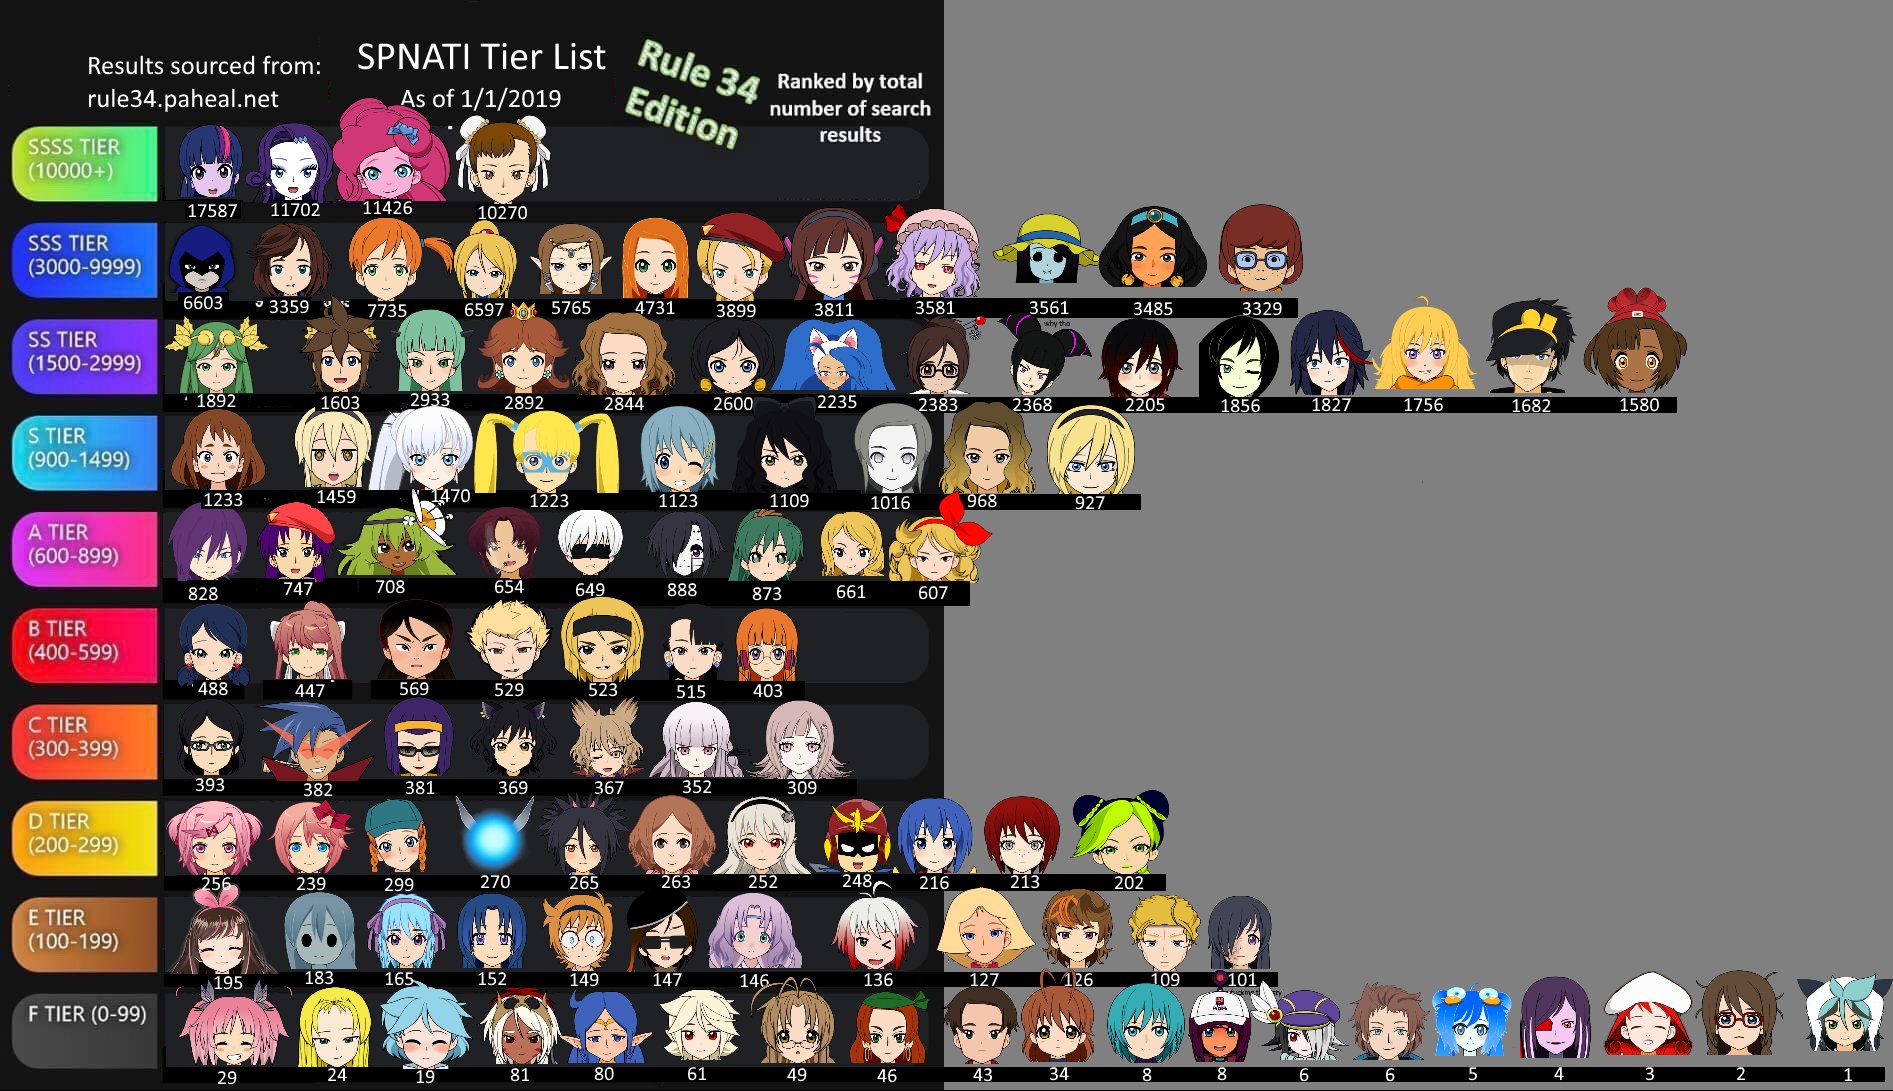 The Inventory ♥ on X: SPNatI Characters: Porn Quantity Tierlist The  numbers represent the amount of search results each t.co8XD2MMscGF  character gets when you search for them on rule34. t.coHmPyuPumUB  t.co7wd7VJqqW0 